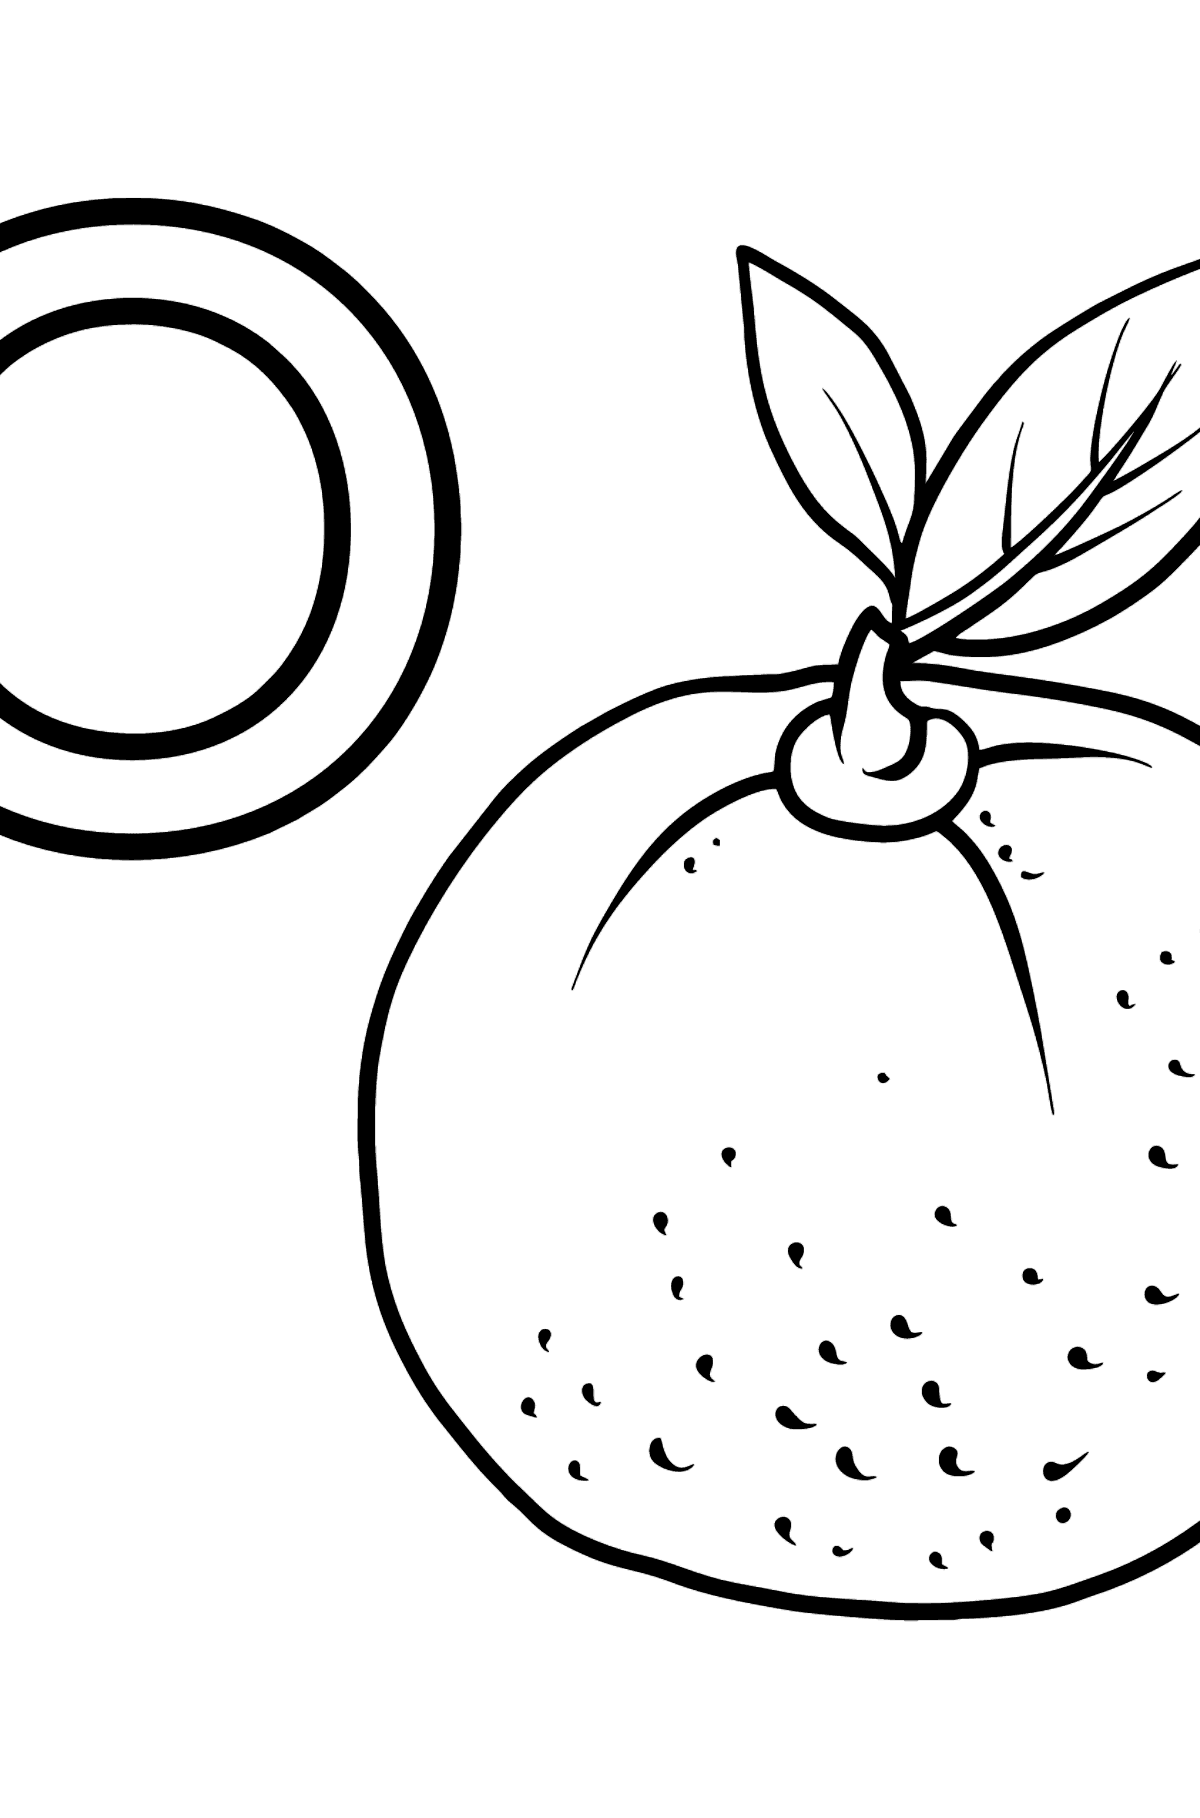 German Letter O coloring pages - ORANGE - Coloring Pages for Kids